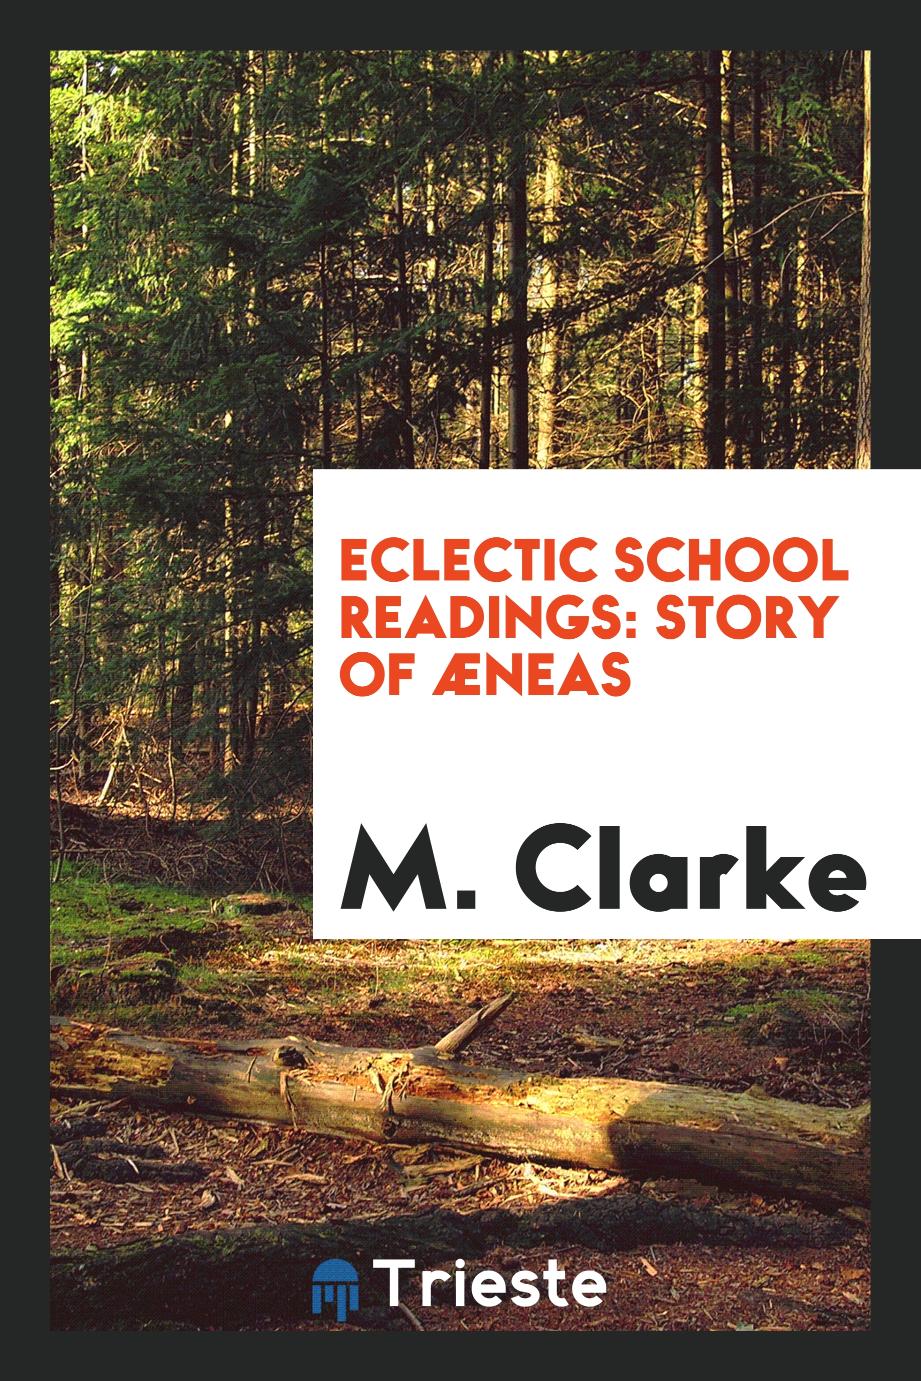 Eclectic School Readings: Story of Æneas